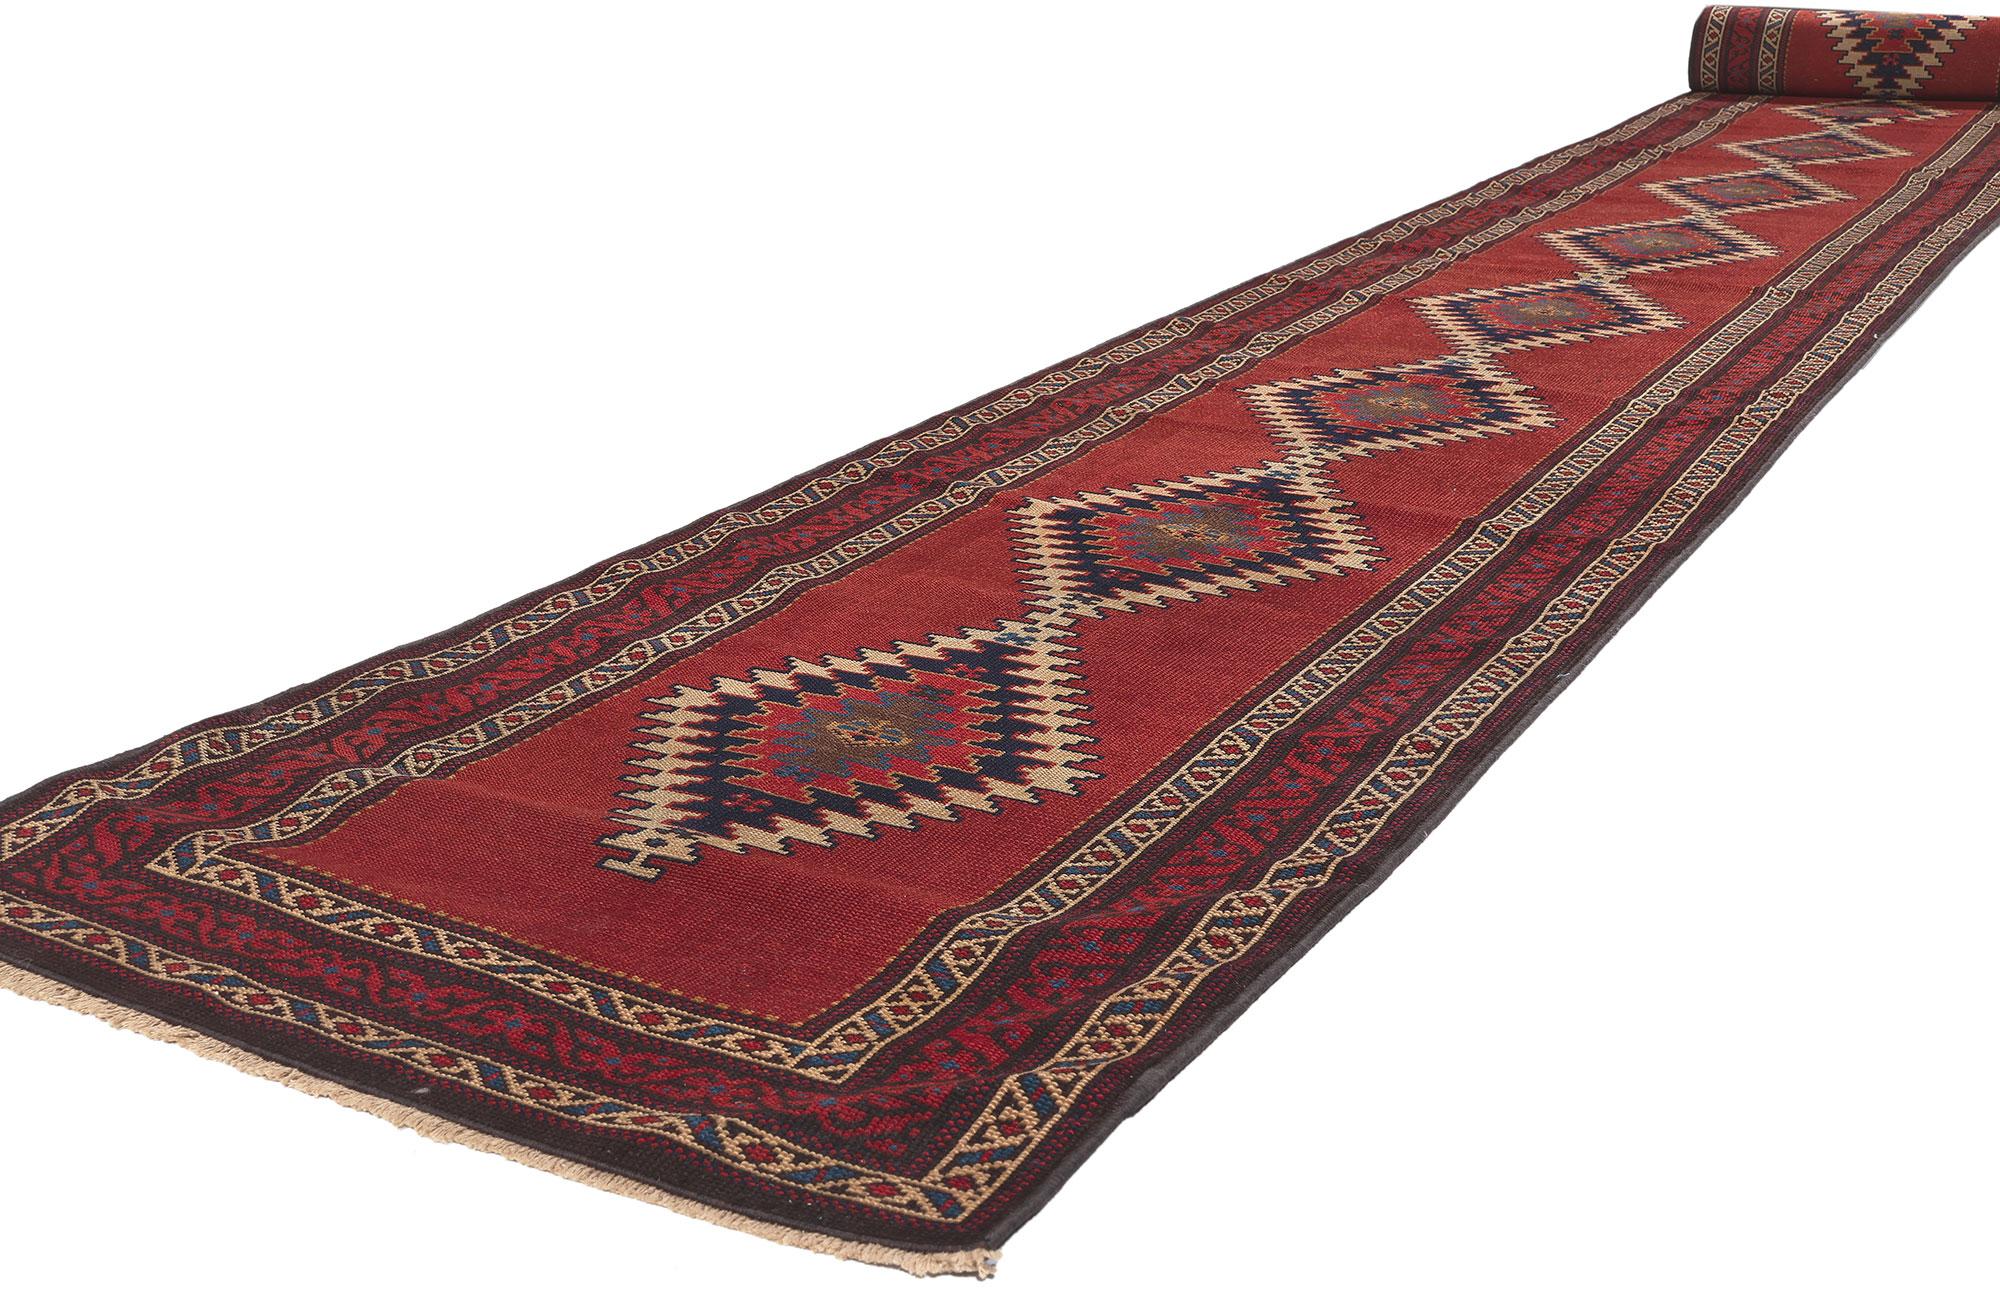 53867 Antique Russian Caucasian Karabagh Rug Runner, 02'08 x 32'01.
Emanating rugged sensibility with incredible detail and texture, this antique Caucasian Karabagh rug runner is a captivating vision of woven beauty. The tribal style and vibrant